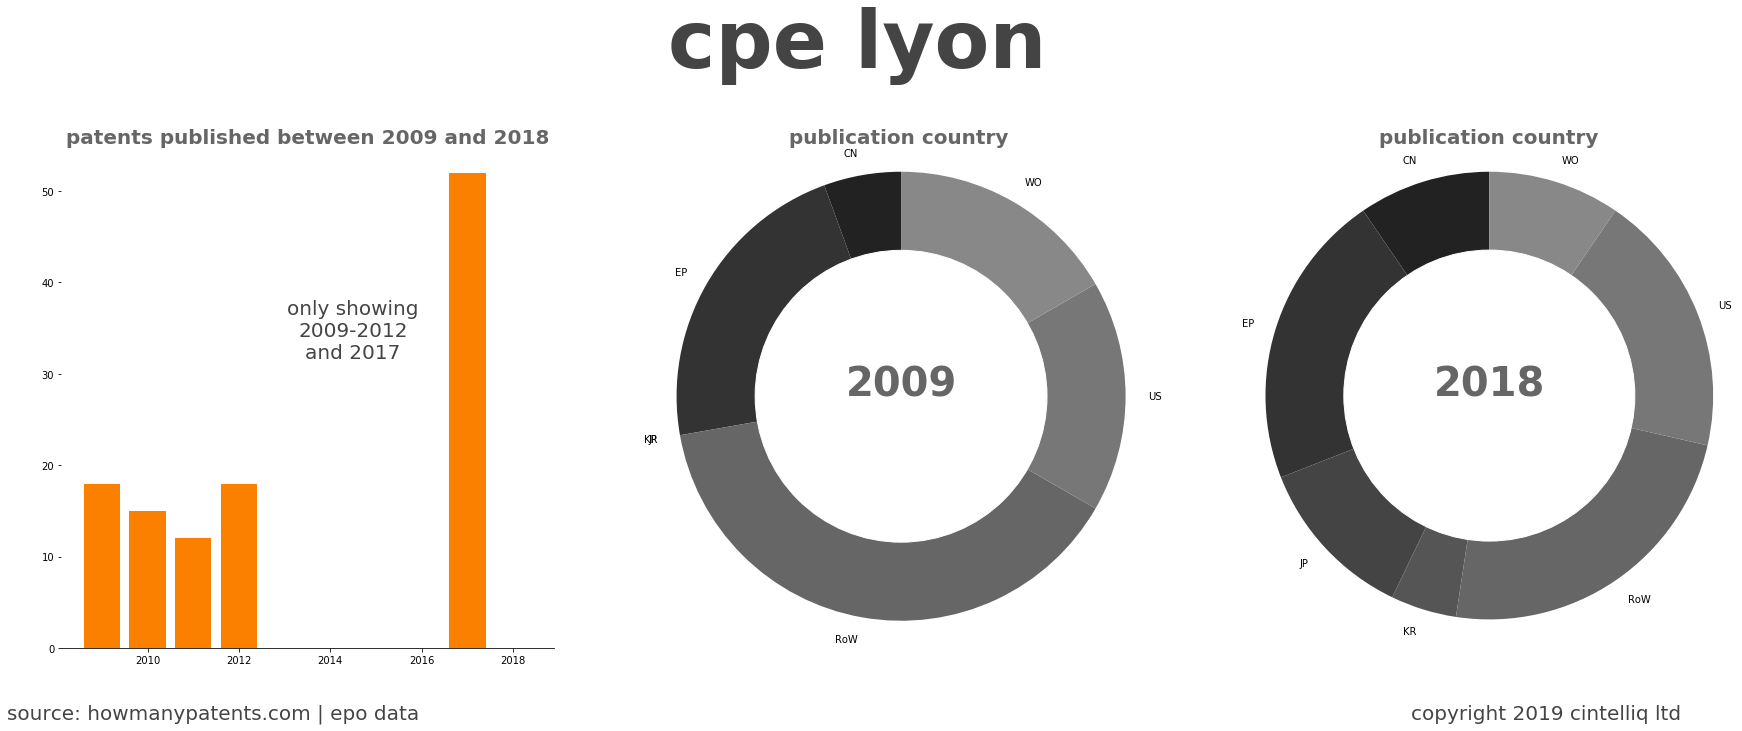 summary of patents for Cpe Lyon 